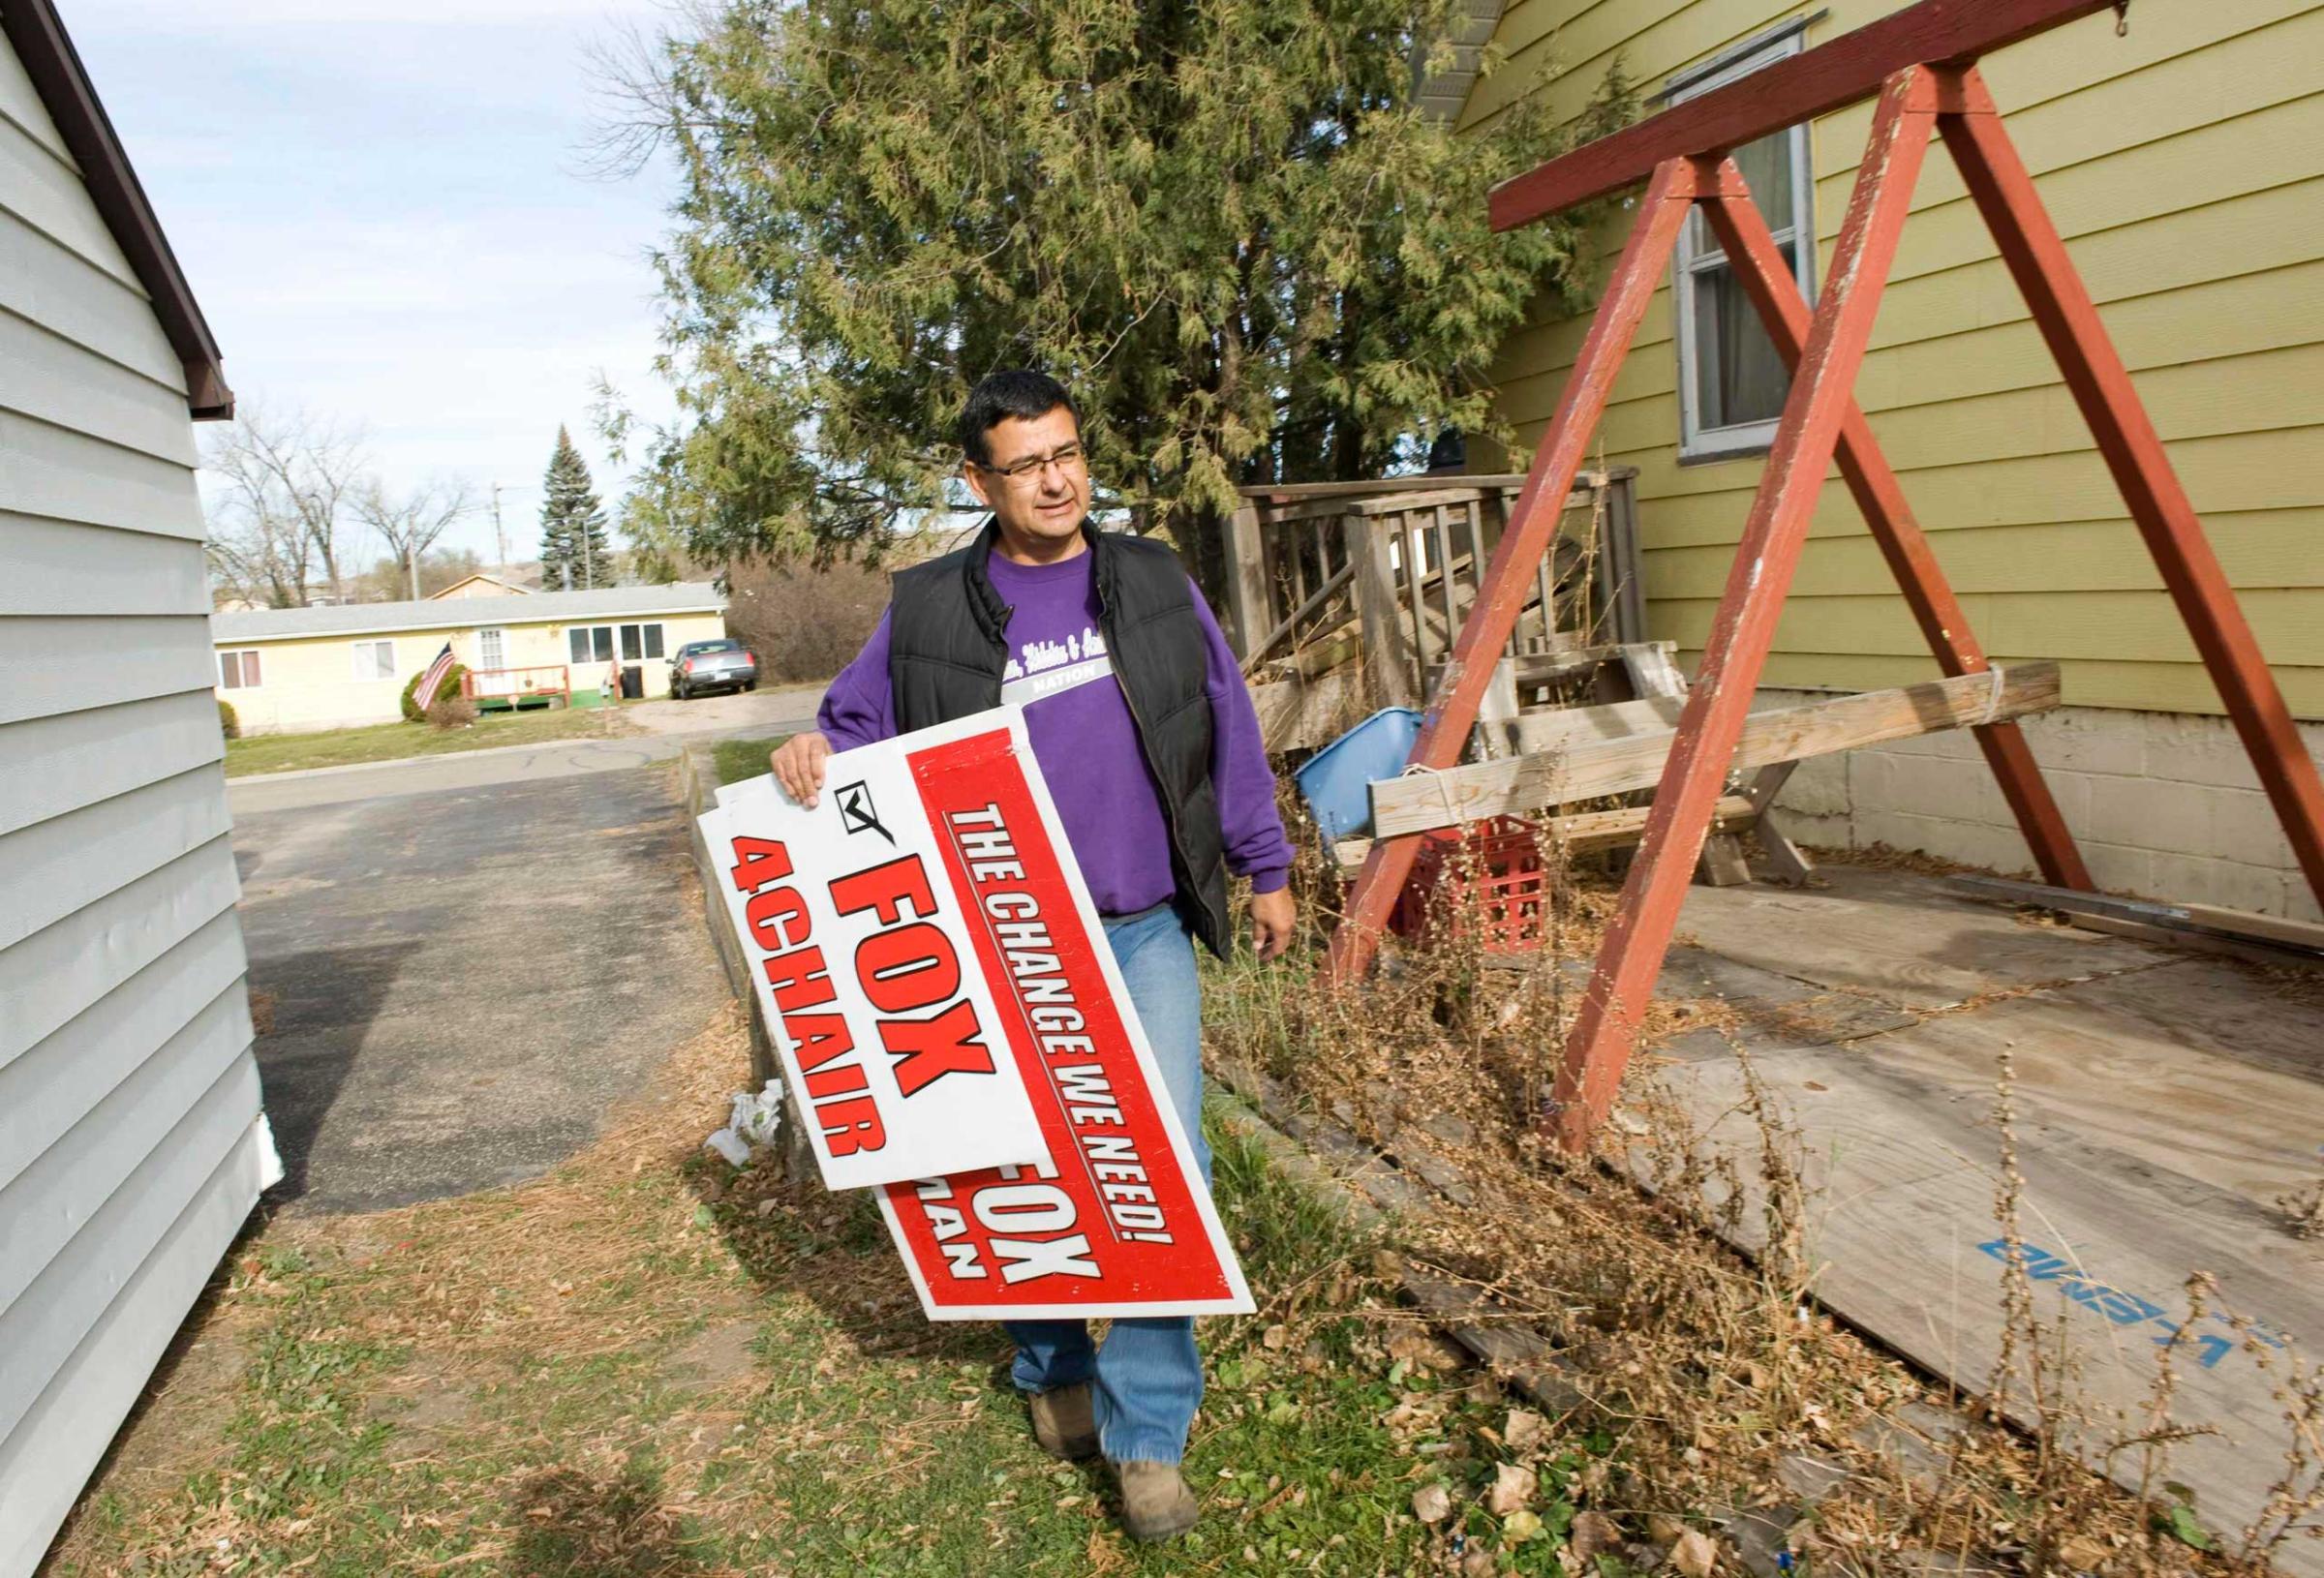 Three Affiliated Tribes council chairman candidate Fox delivers signs to a supporter's house on the Fort Berthold Reservation in North Dakota